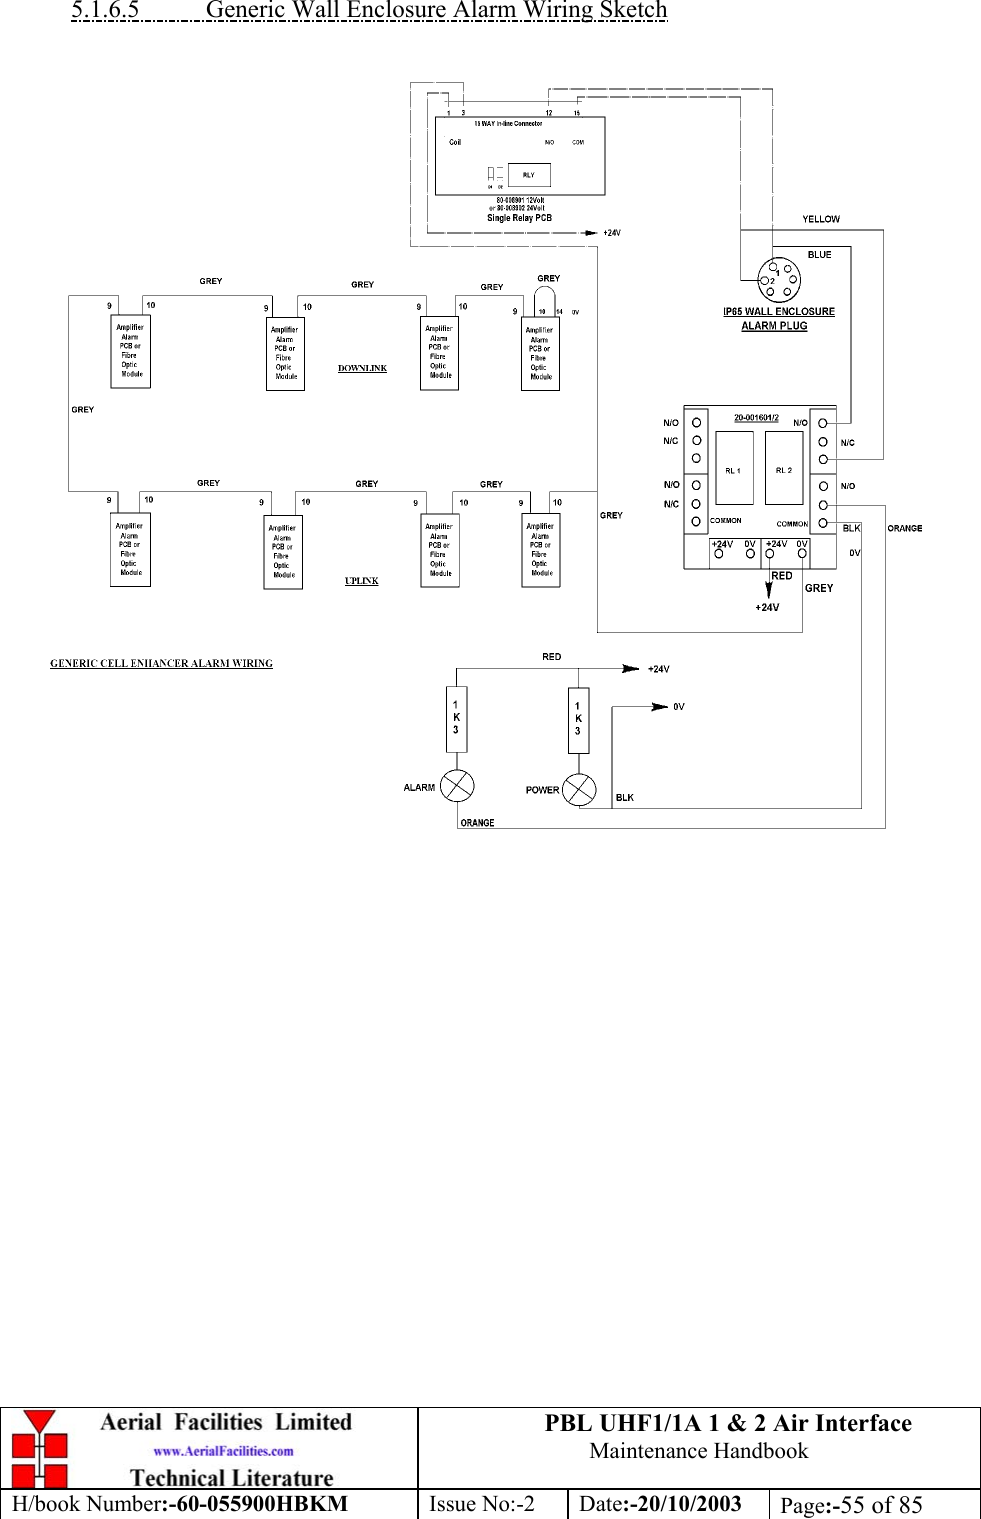 PBL UHF1/1A 1 &amp; 2 Air InterfaceMaintenance HandbookH/book Number:-60-055900HBKM Issue No:-2 Date:-20/10/2003 Page:-55 of 855.1.6.5           Generic Wall Enclosure Alarm Wiring Sketch